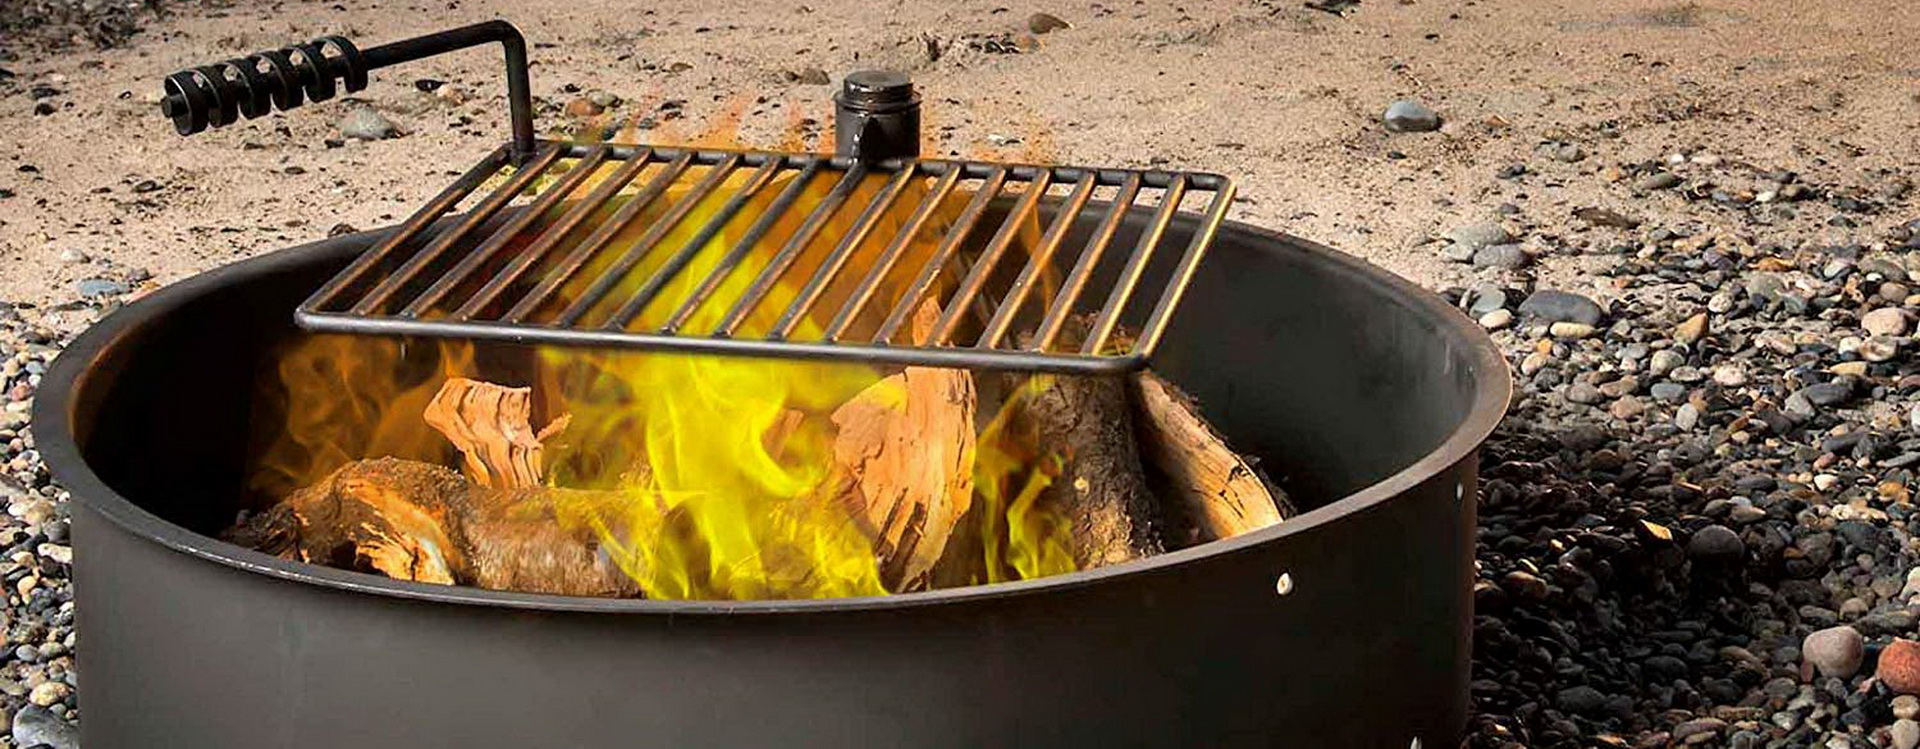 fire ring with cooking grate